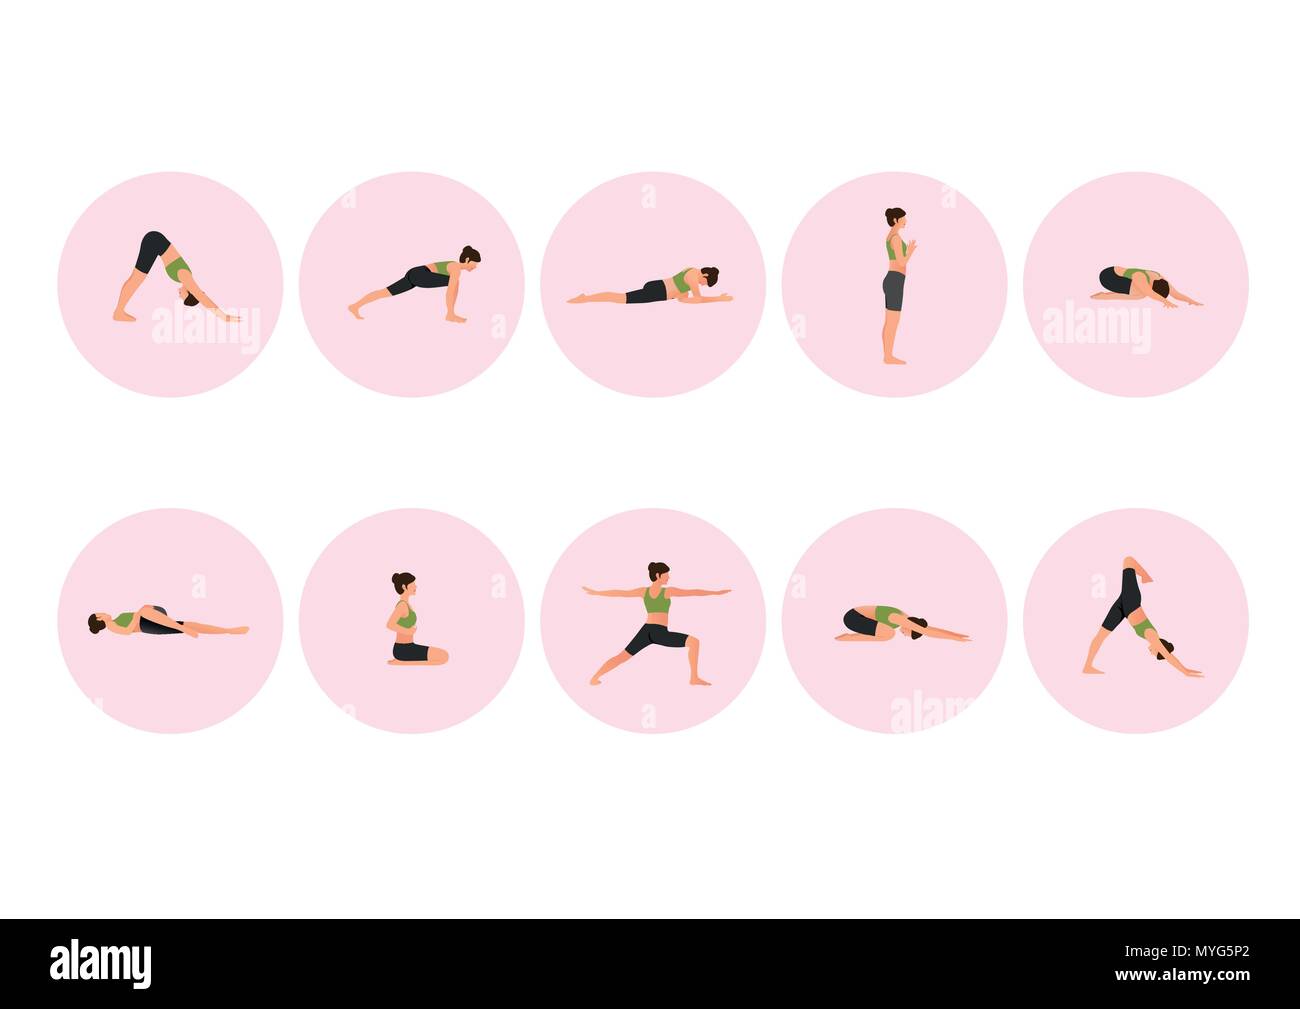 Training people icons set for sport and fitness. Flat style design vector illustration. 002 Stock Vector